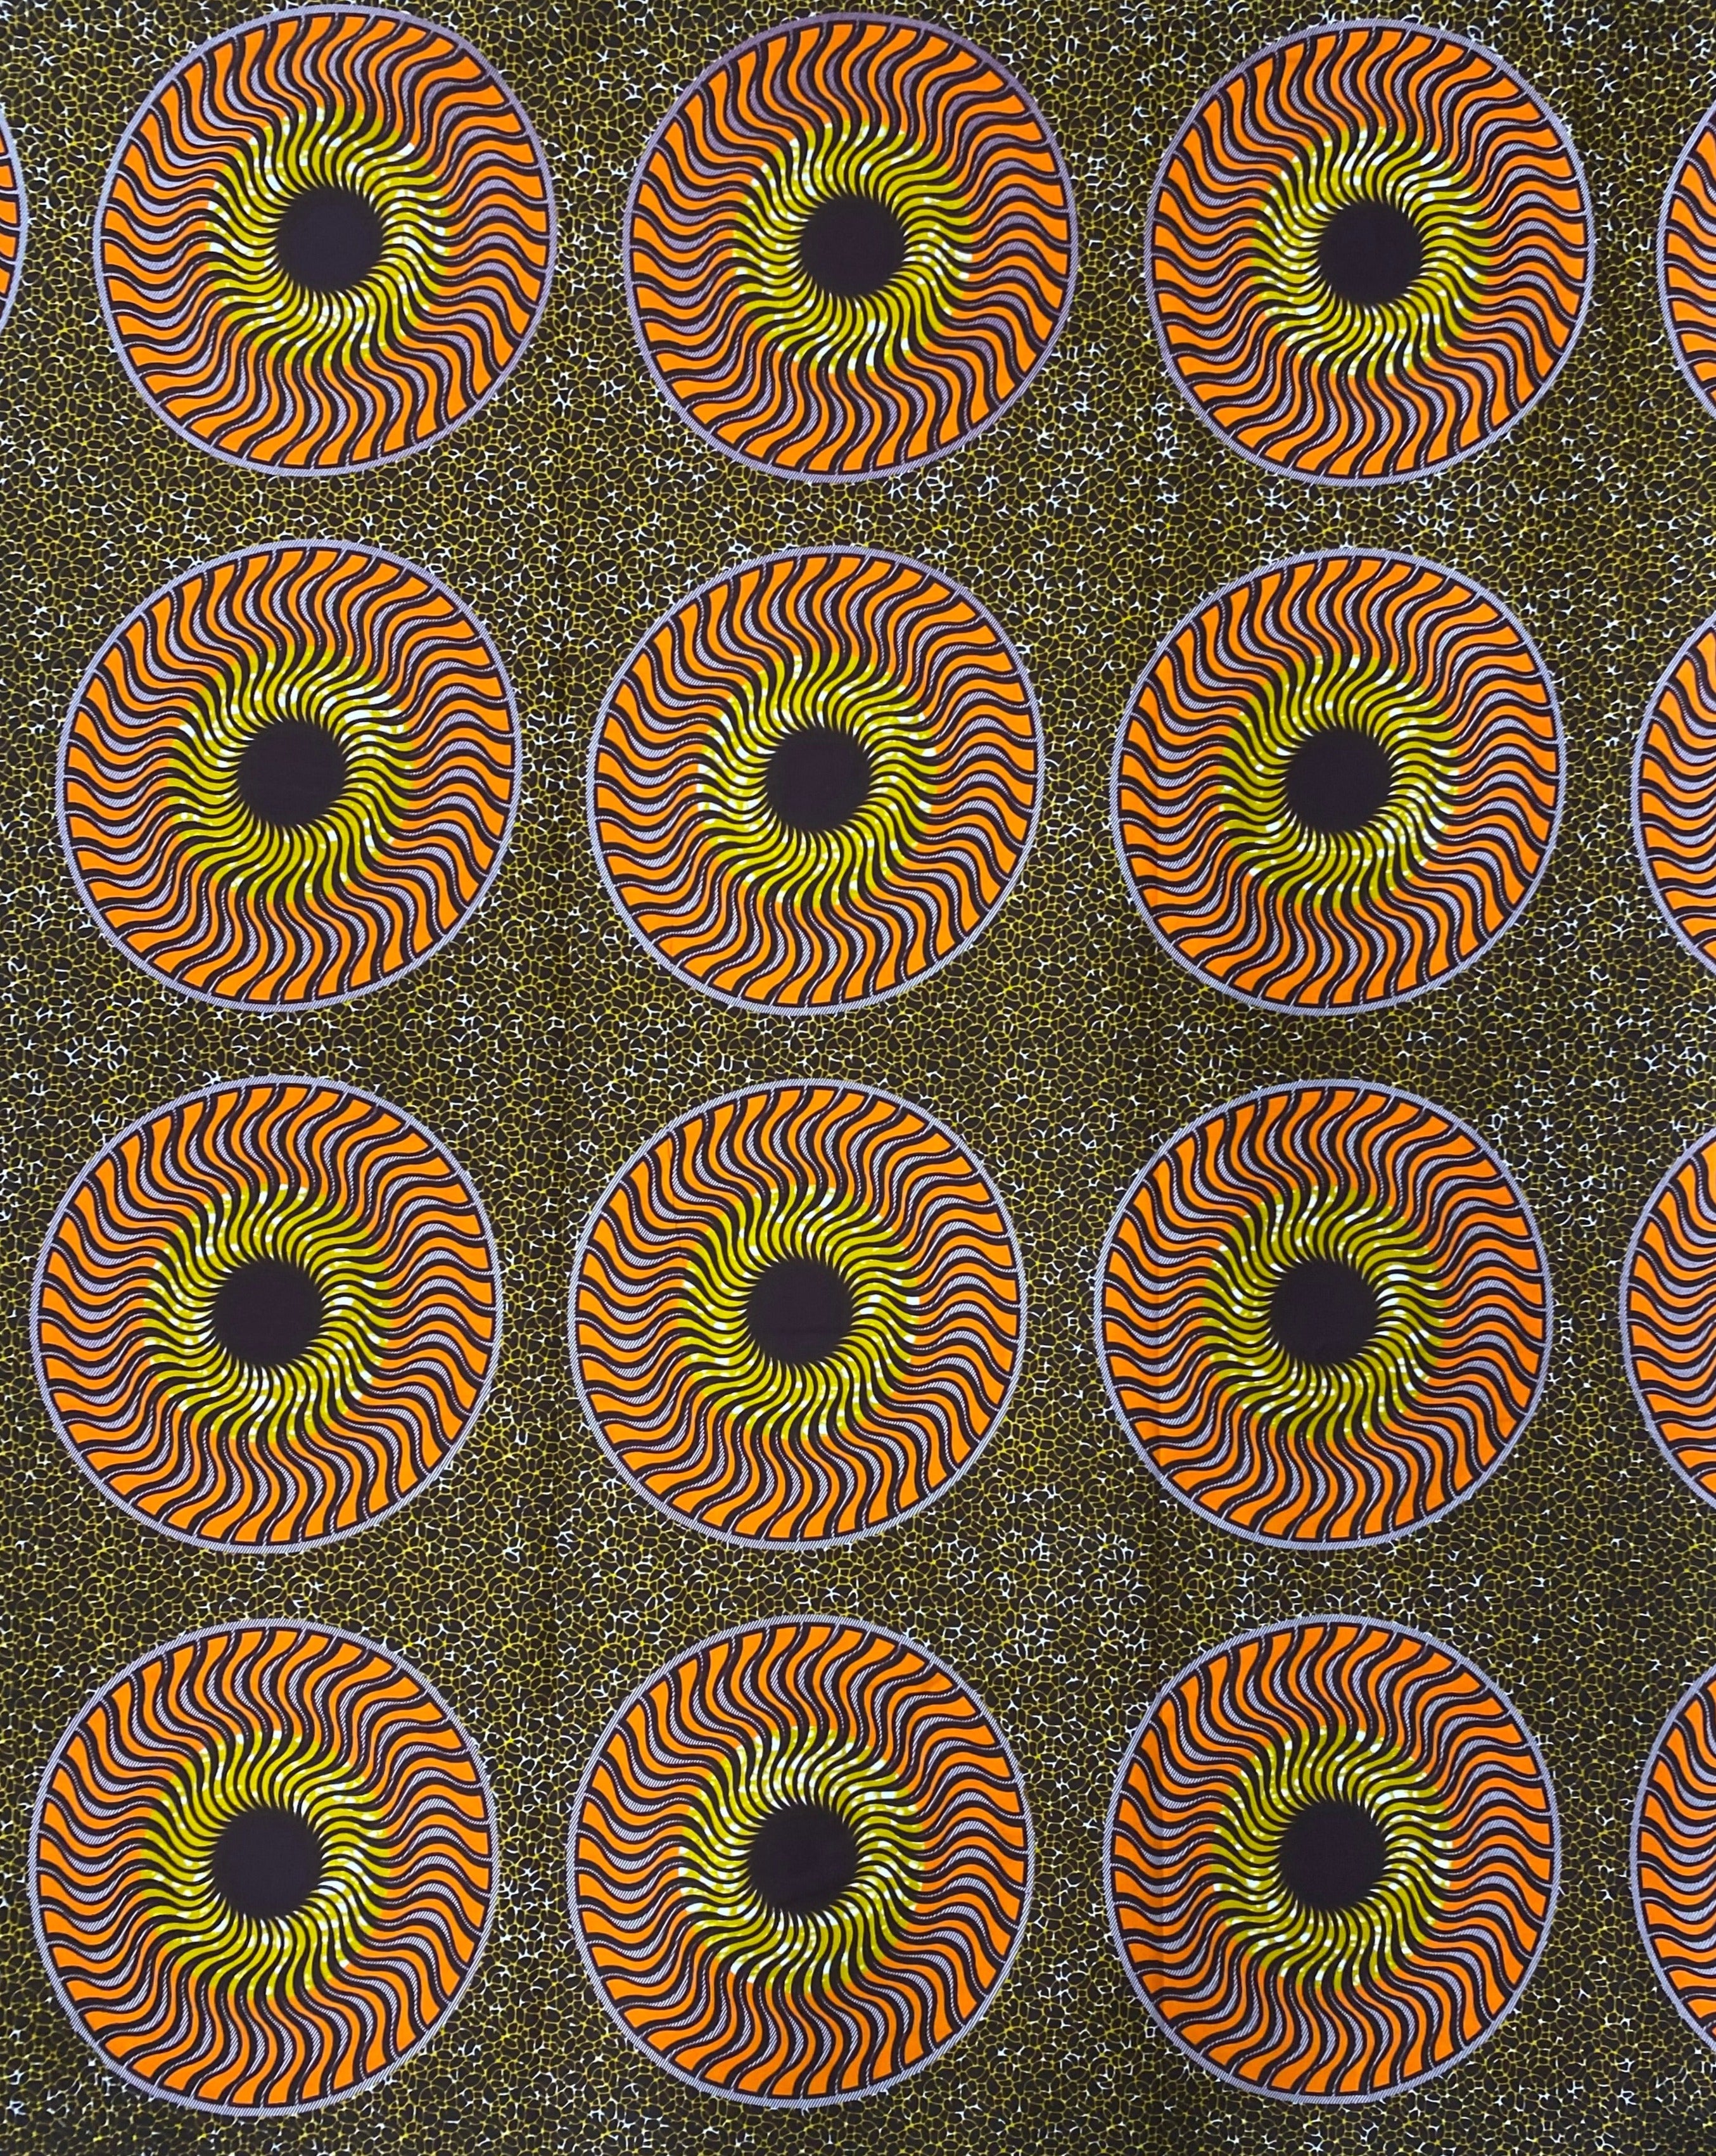 Earth's Rotation African Print Fabric - 100% Cotton, 44" Wide, Global Elegance